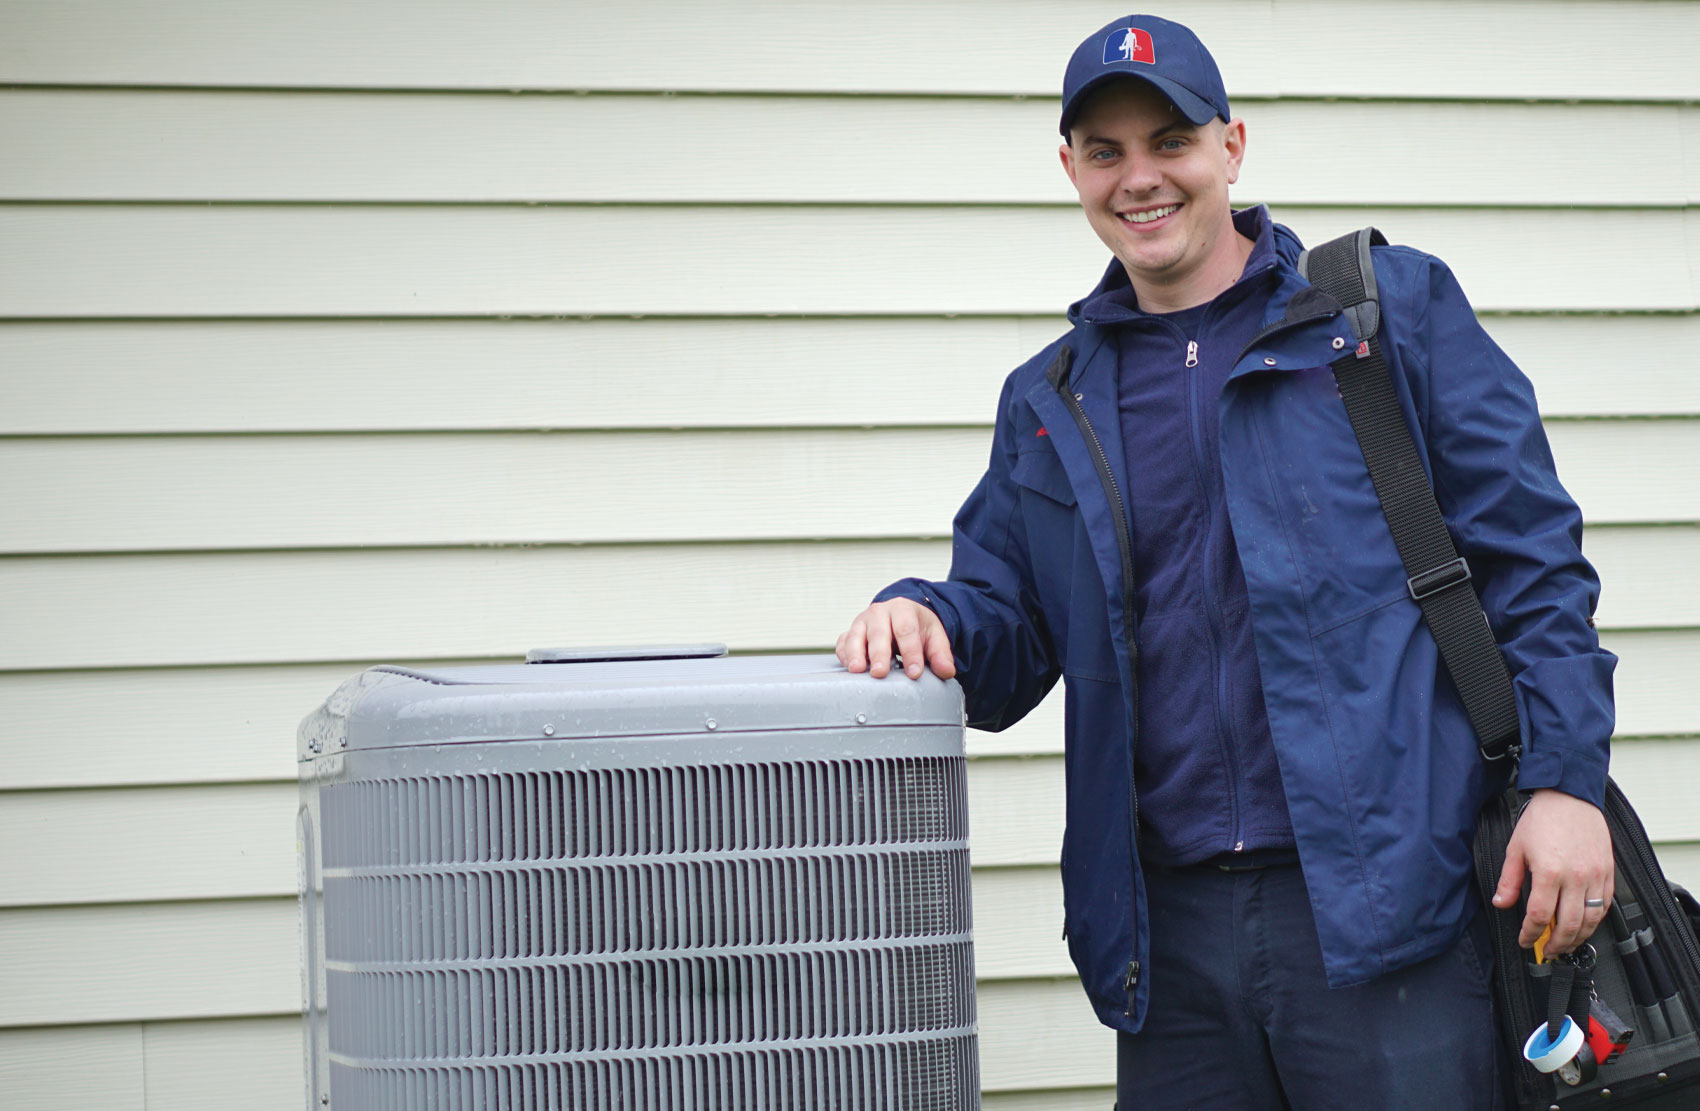 About Canal Winchester Heating & Cooling